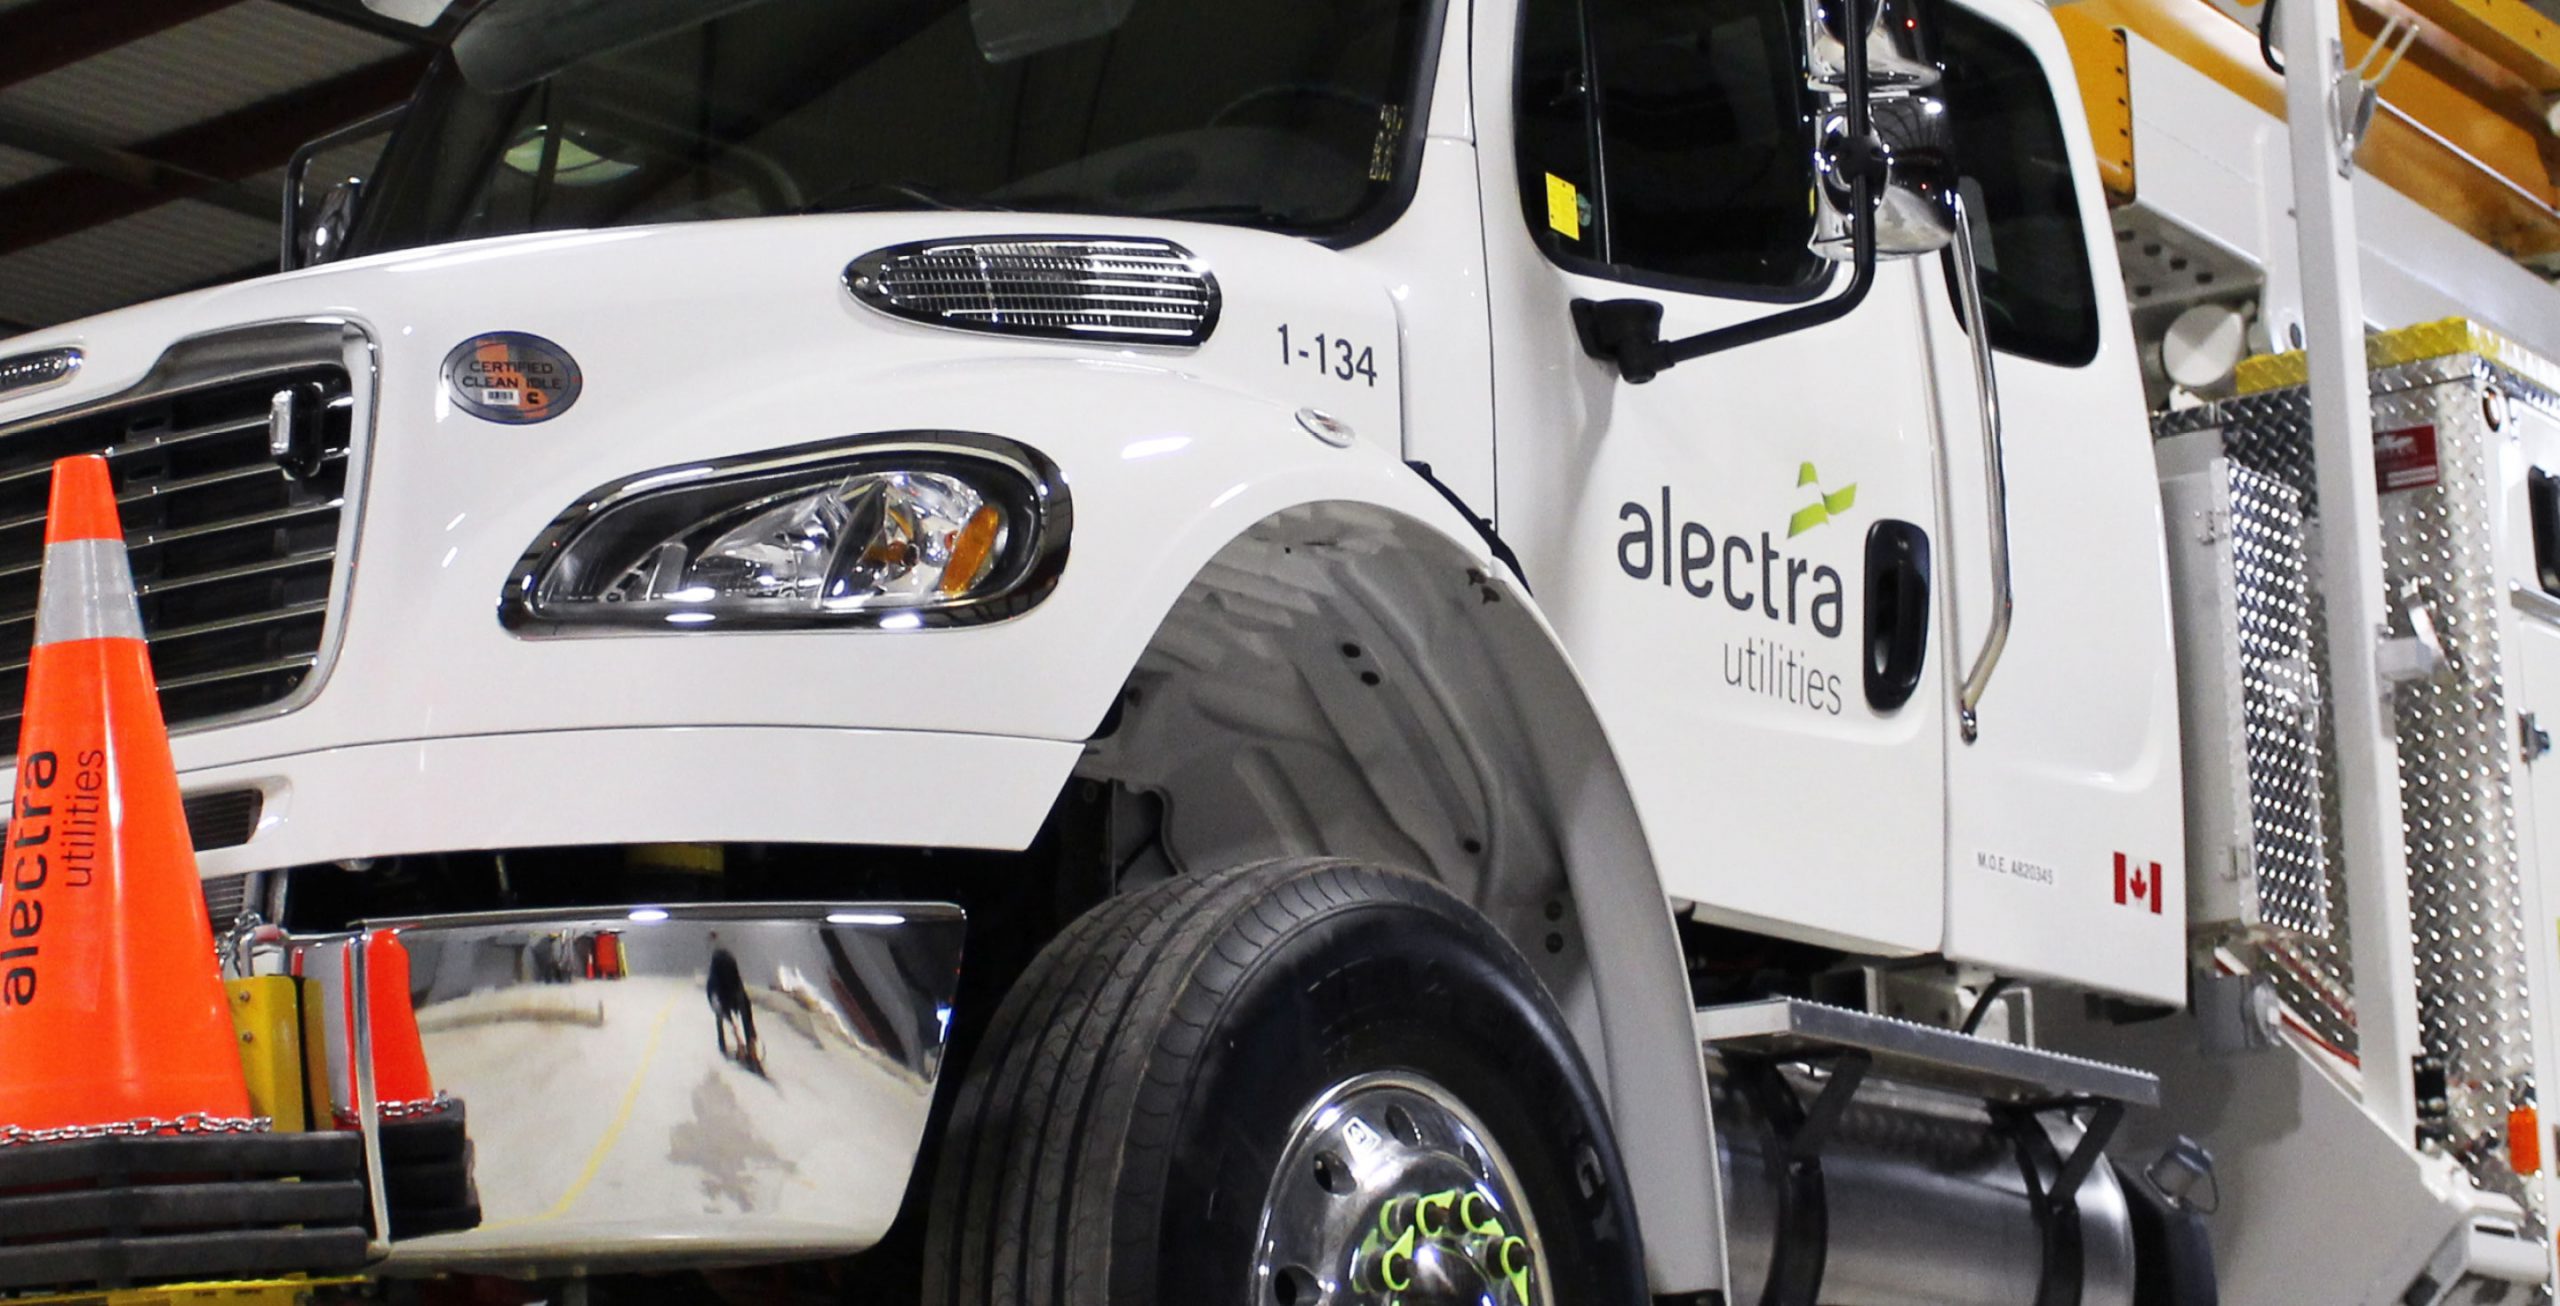 A close up image of one of Alectra’s branded fleet trucks.